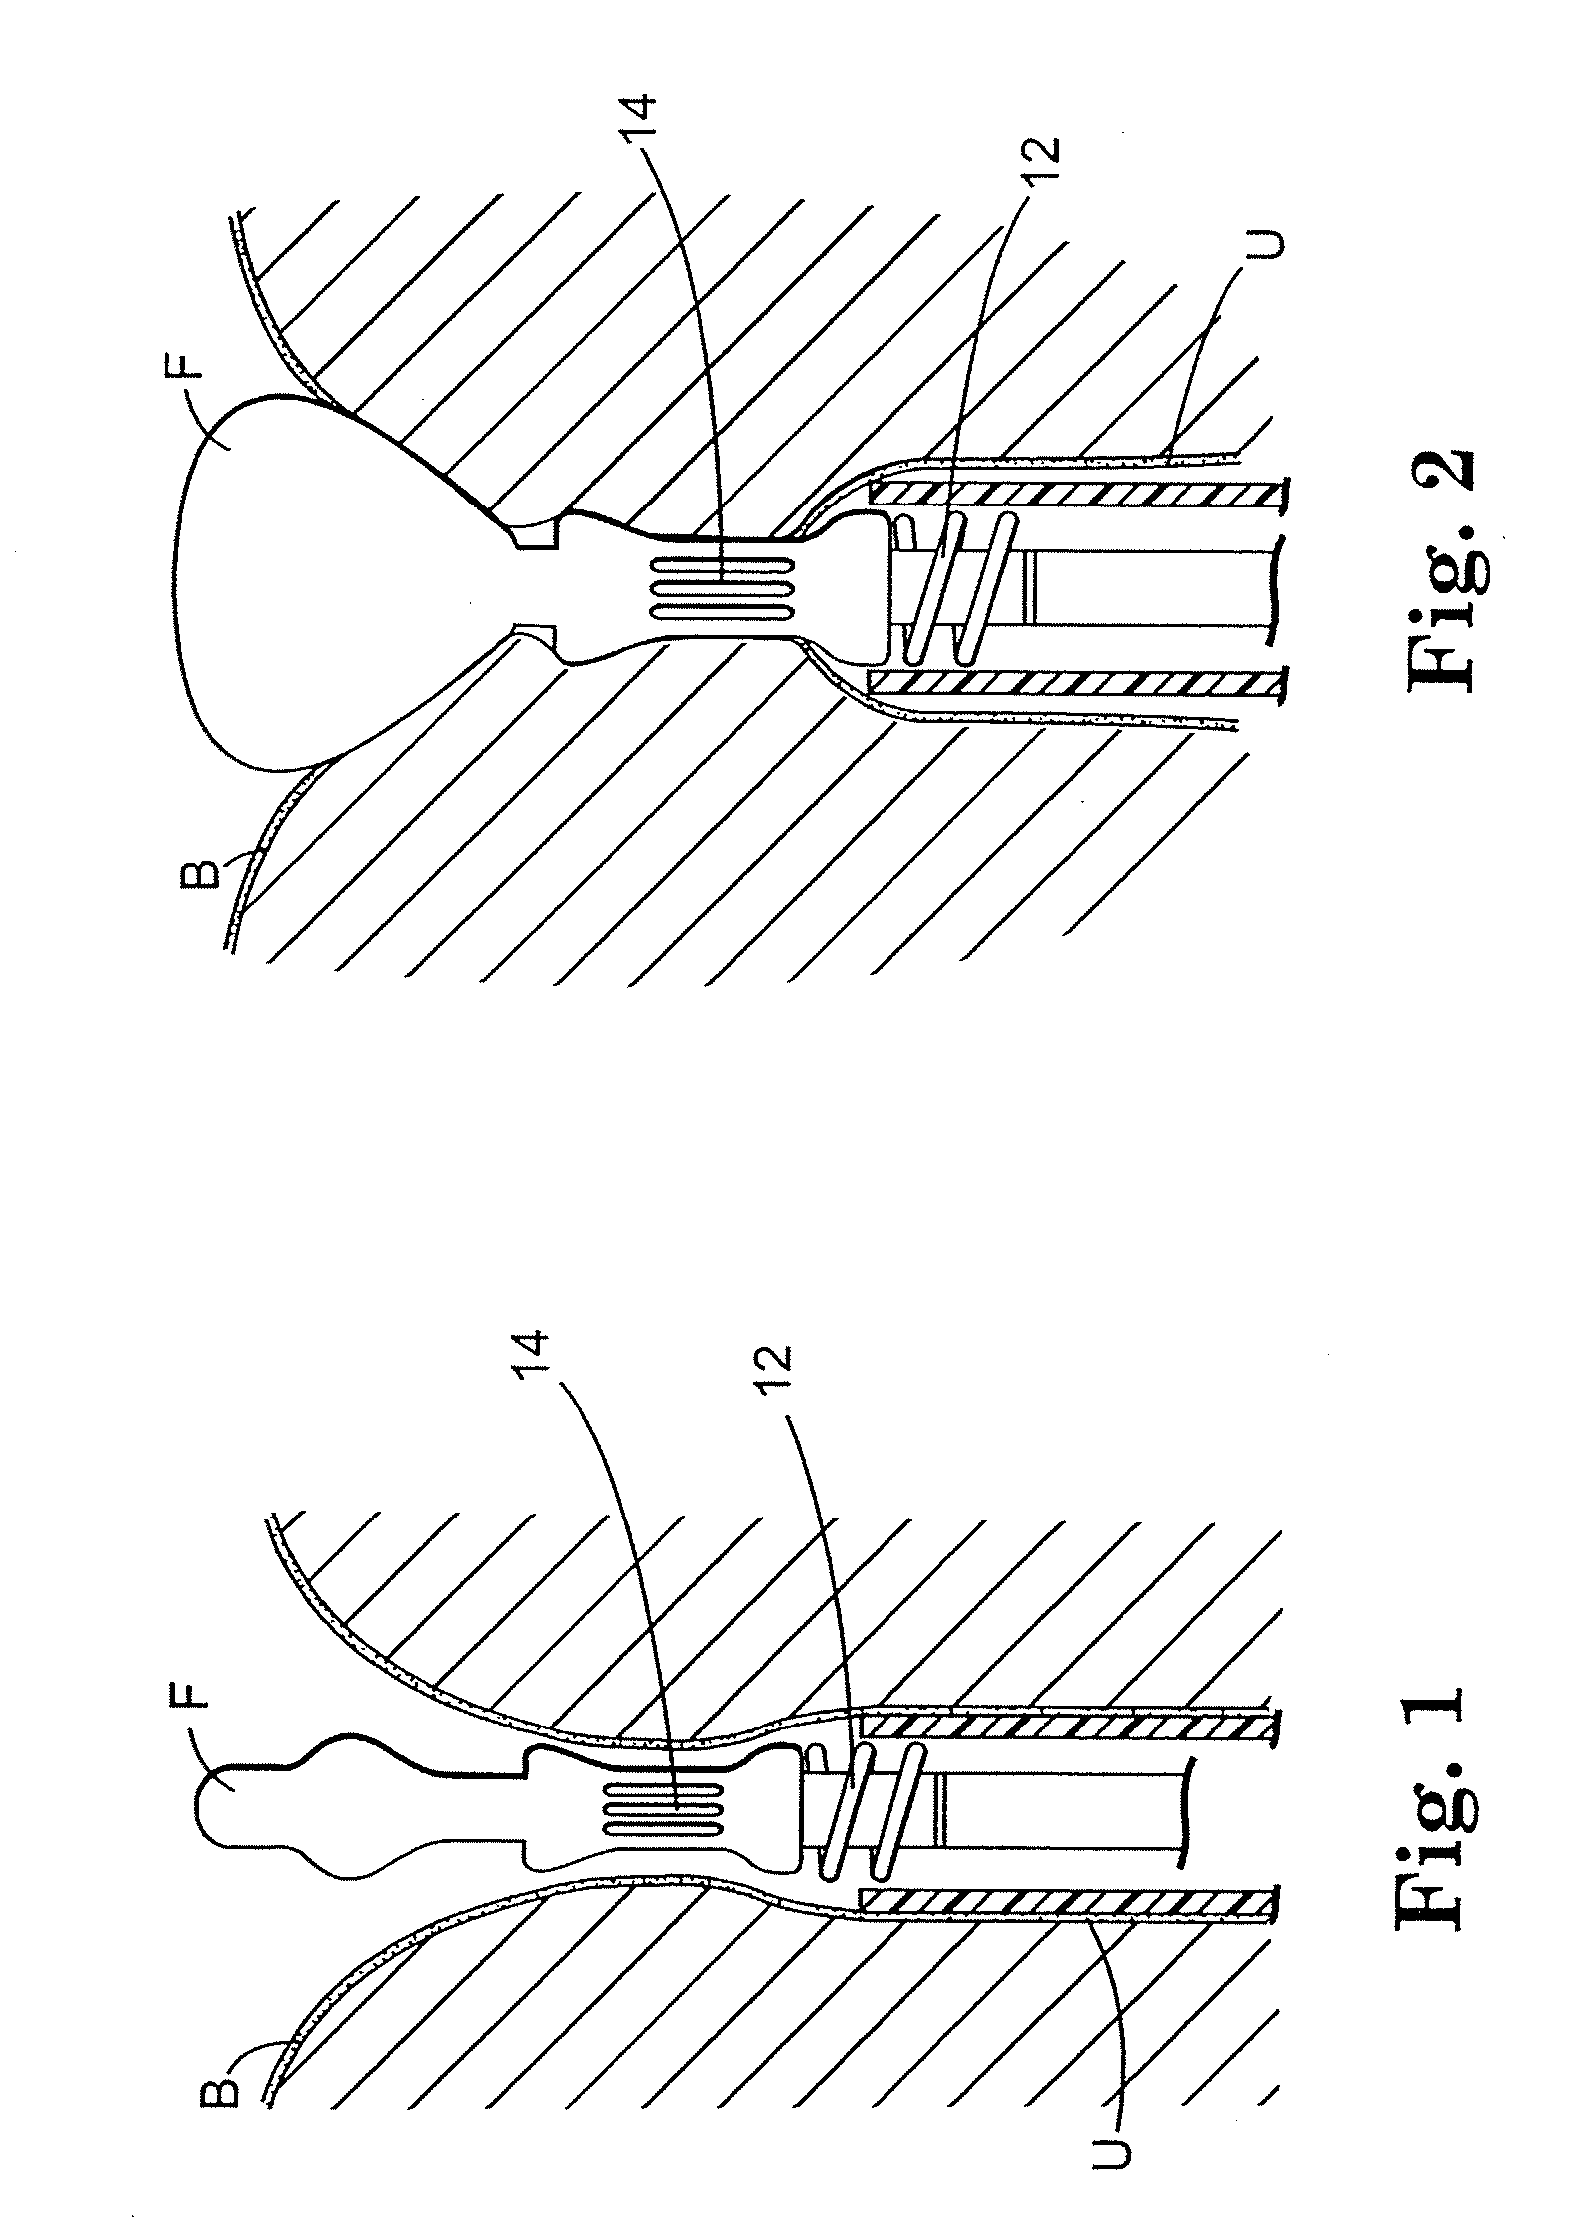 Surgical Articles for Placing an Implant about a Tubular Tissue Structure and Methods